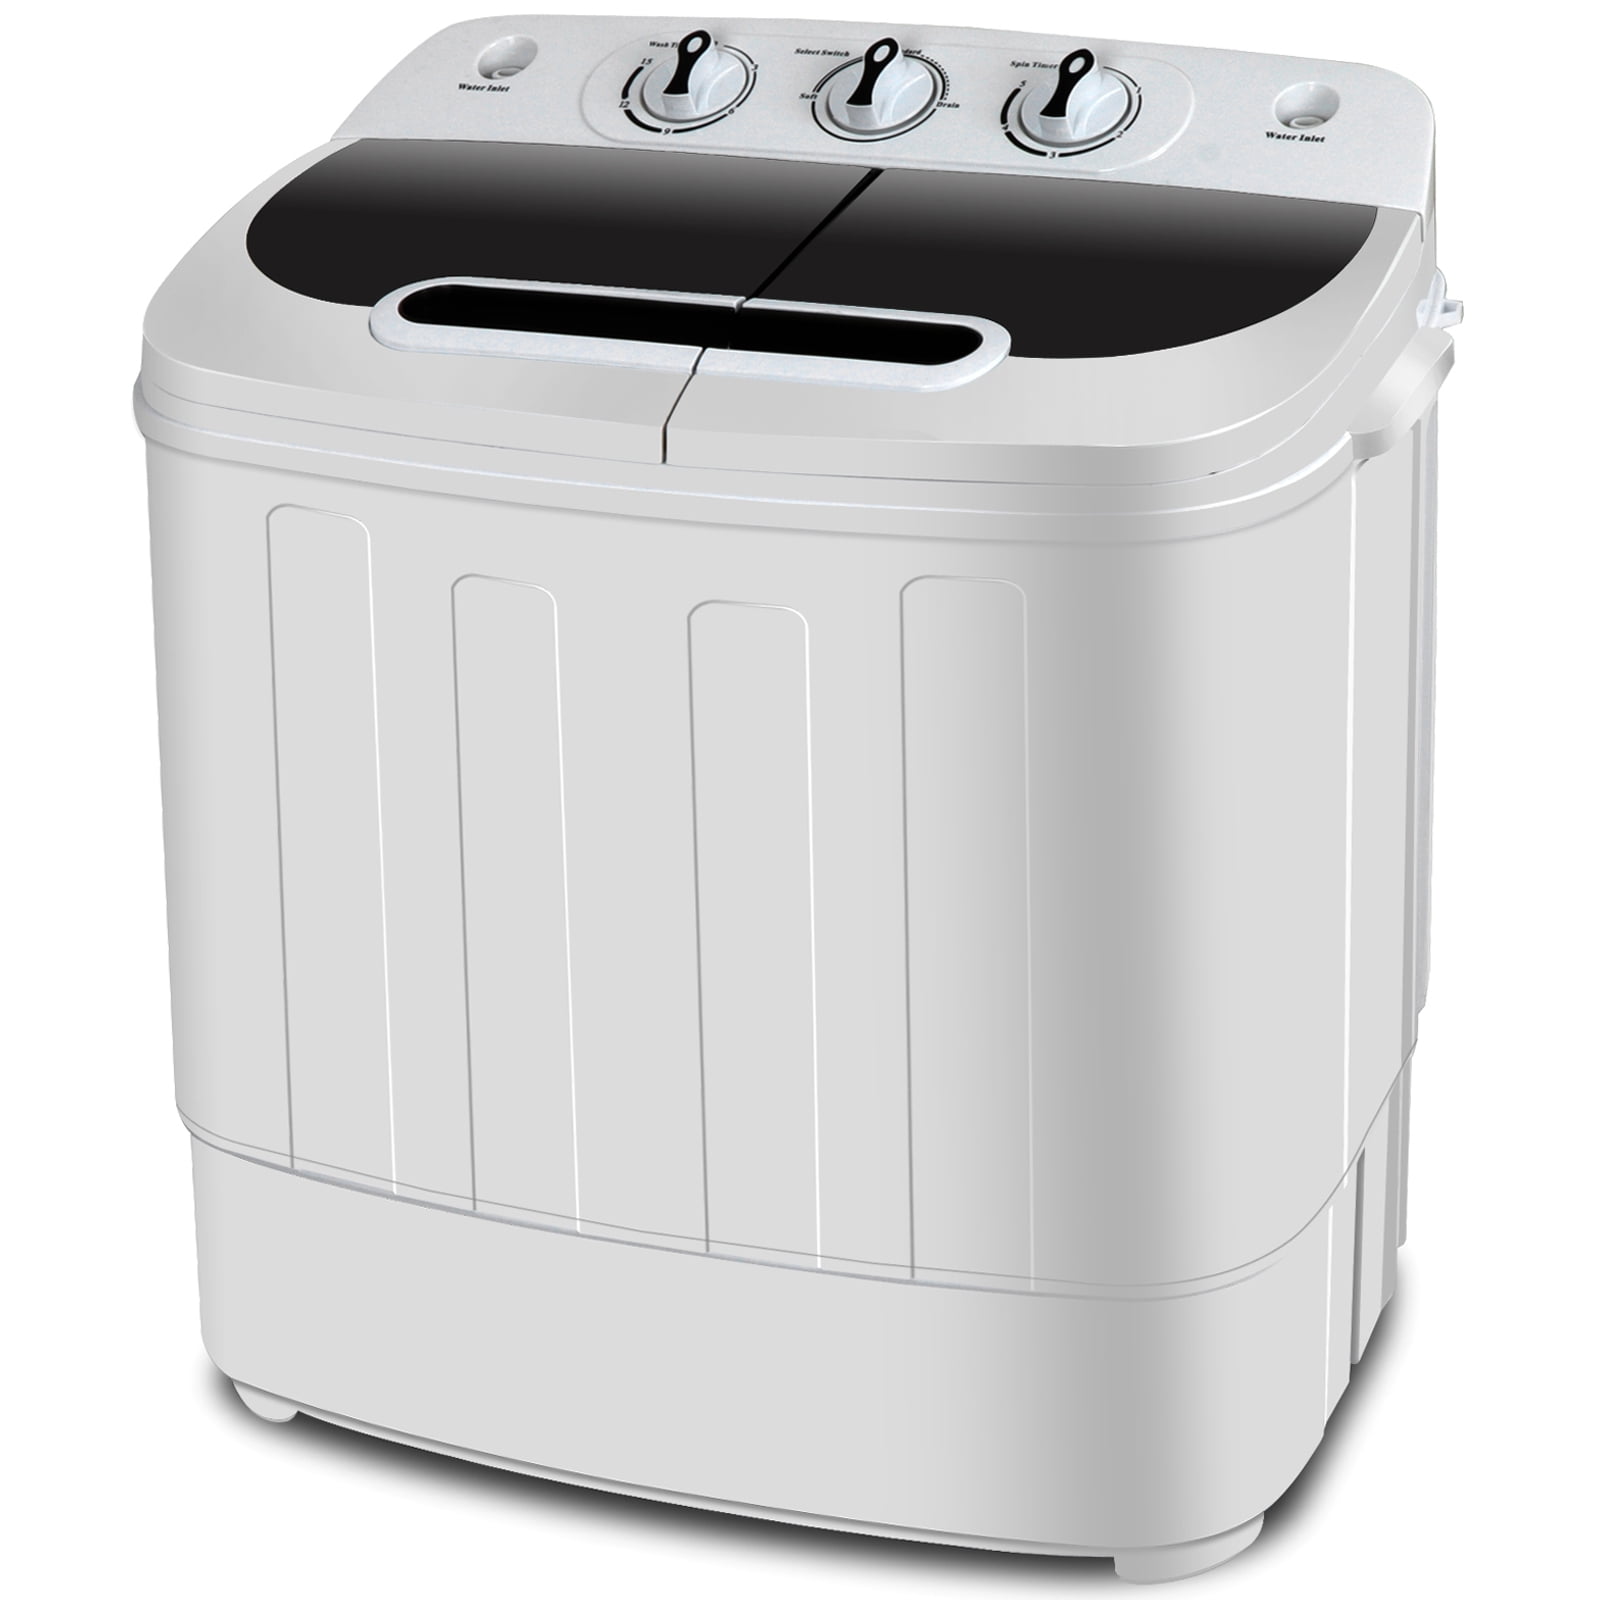 Portable Washing Machine 2 in 1 Laundry Washer and Dryer Combo 13Lbs Dorm Apartment Semi-Automatic Twin Tub Mini Washer 